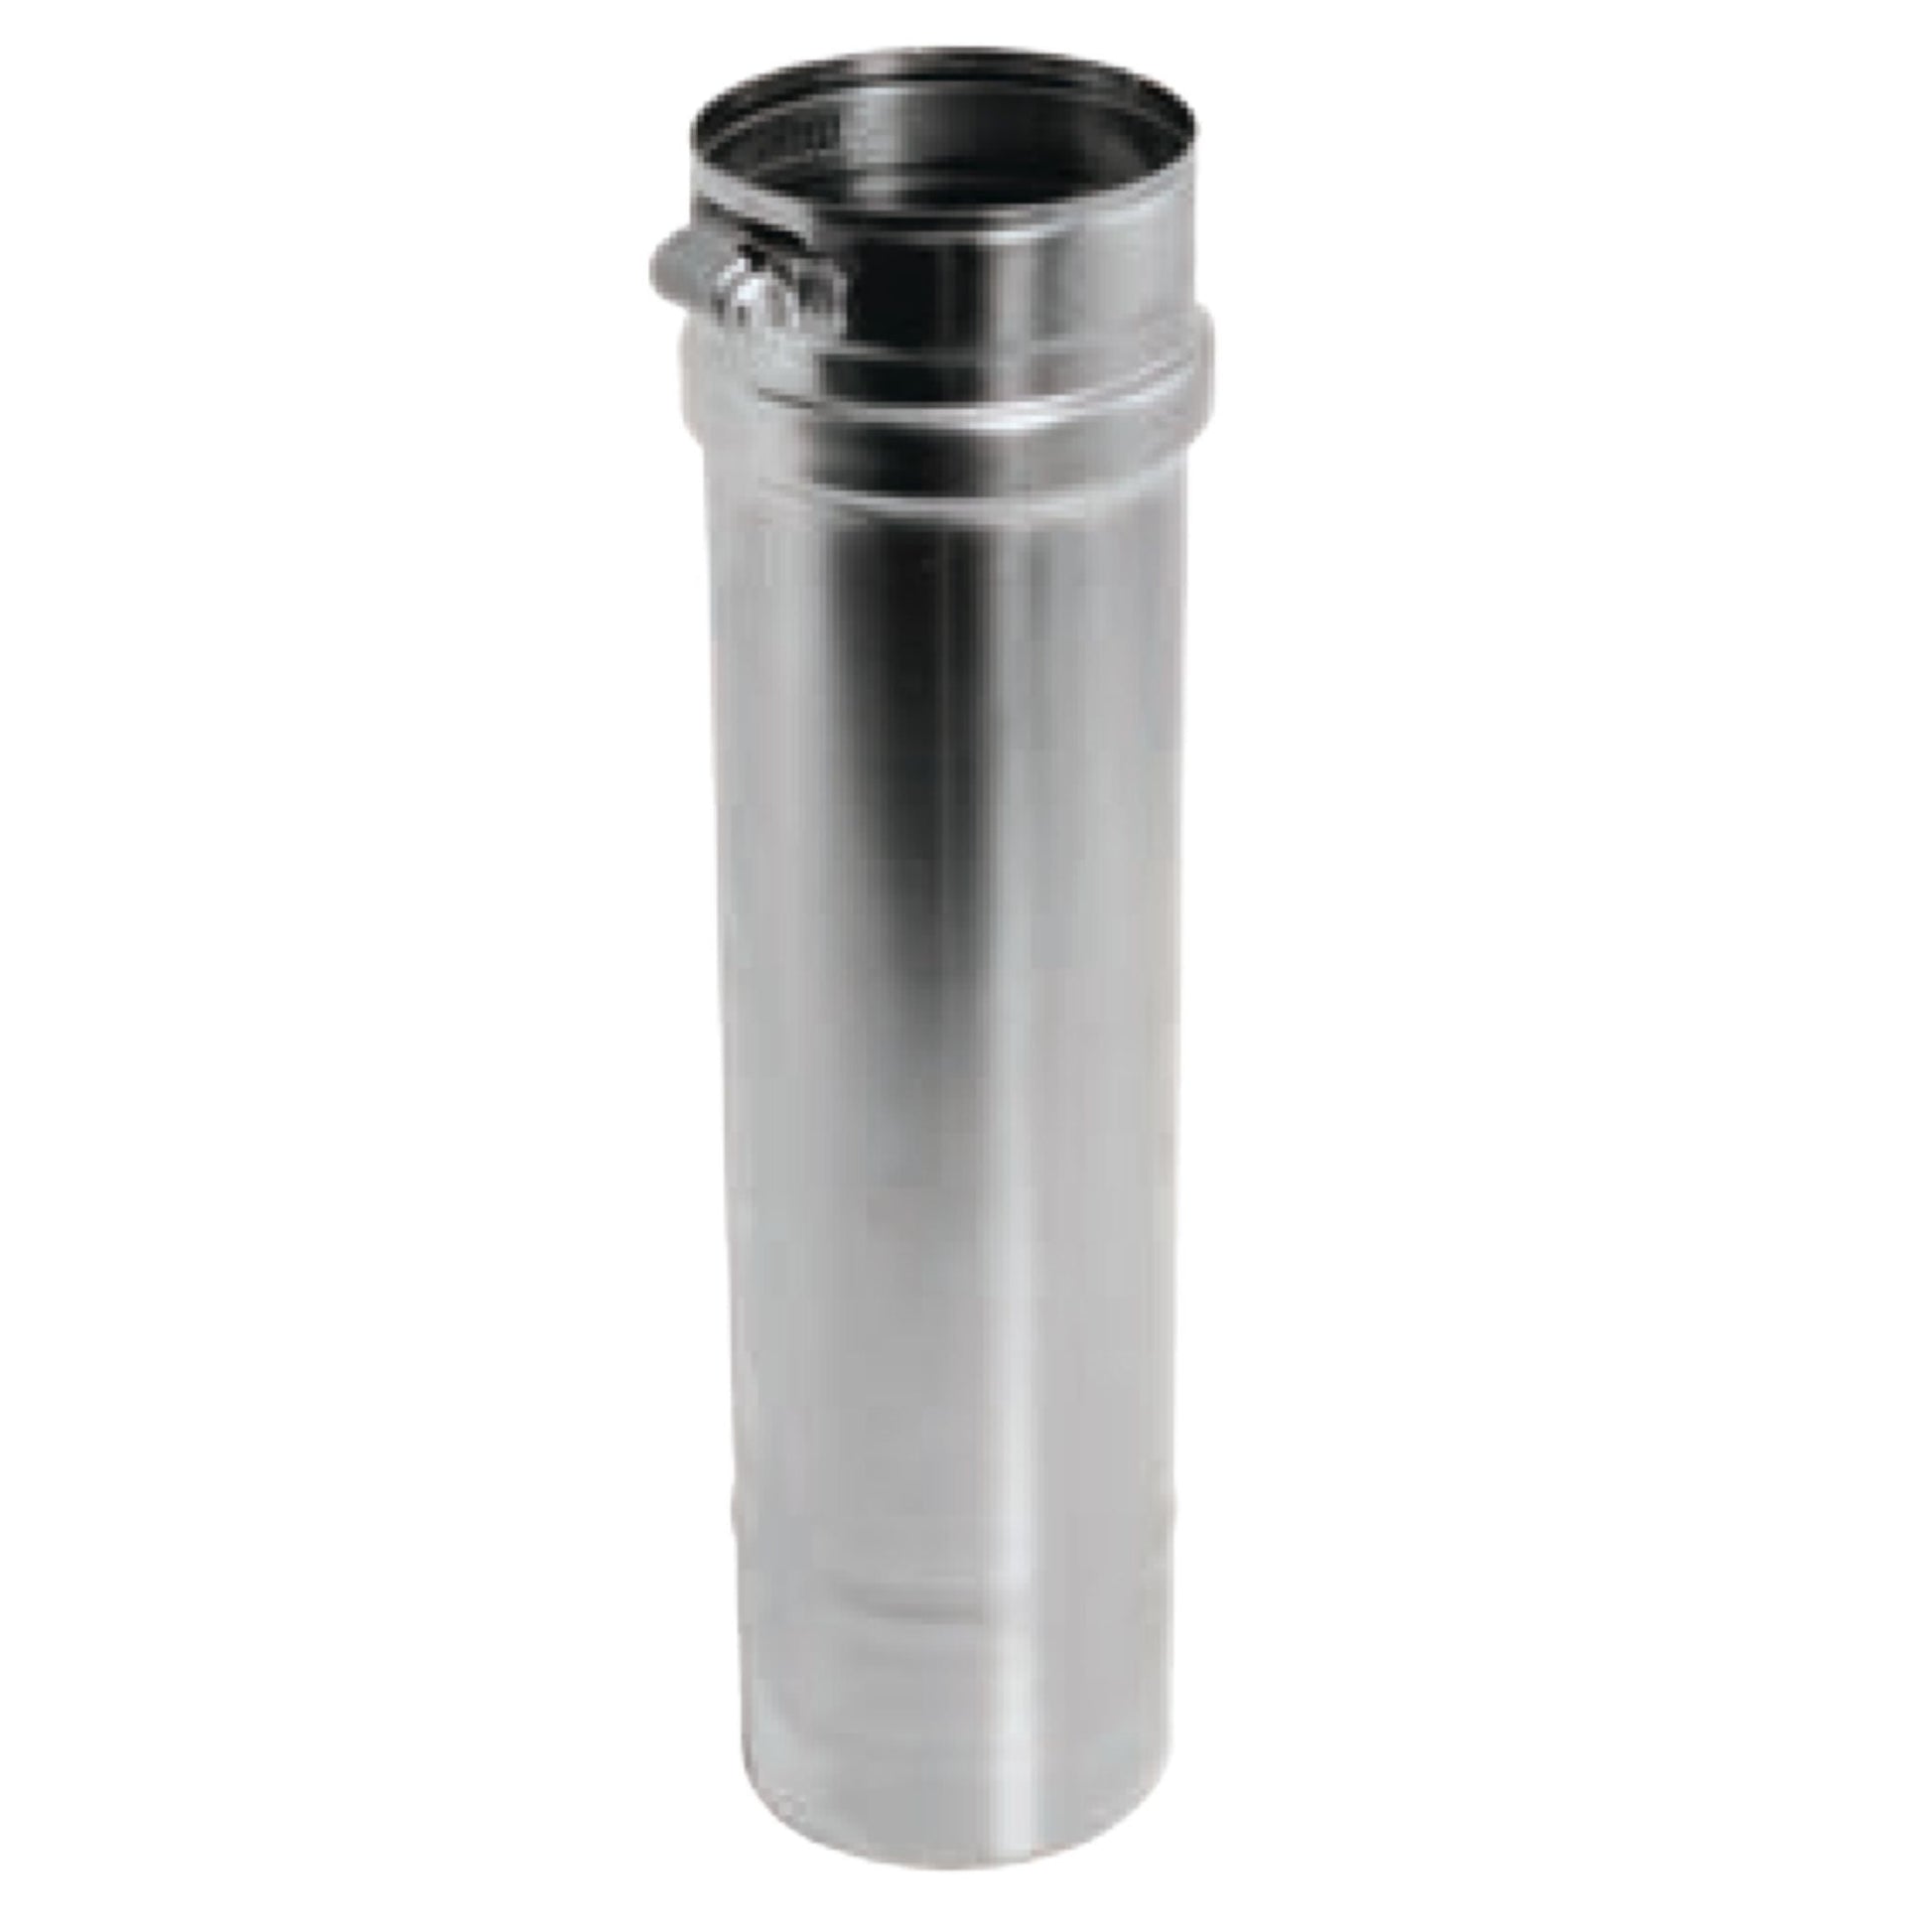 DuraVent FasNSeal 6" x 36" 316L Stainless Steel Vent Length